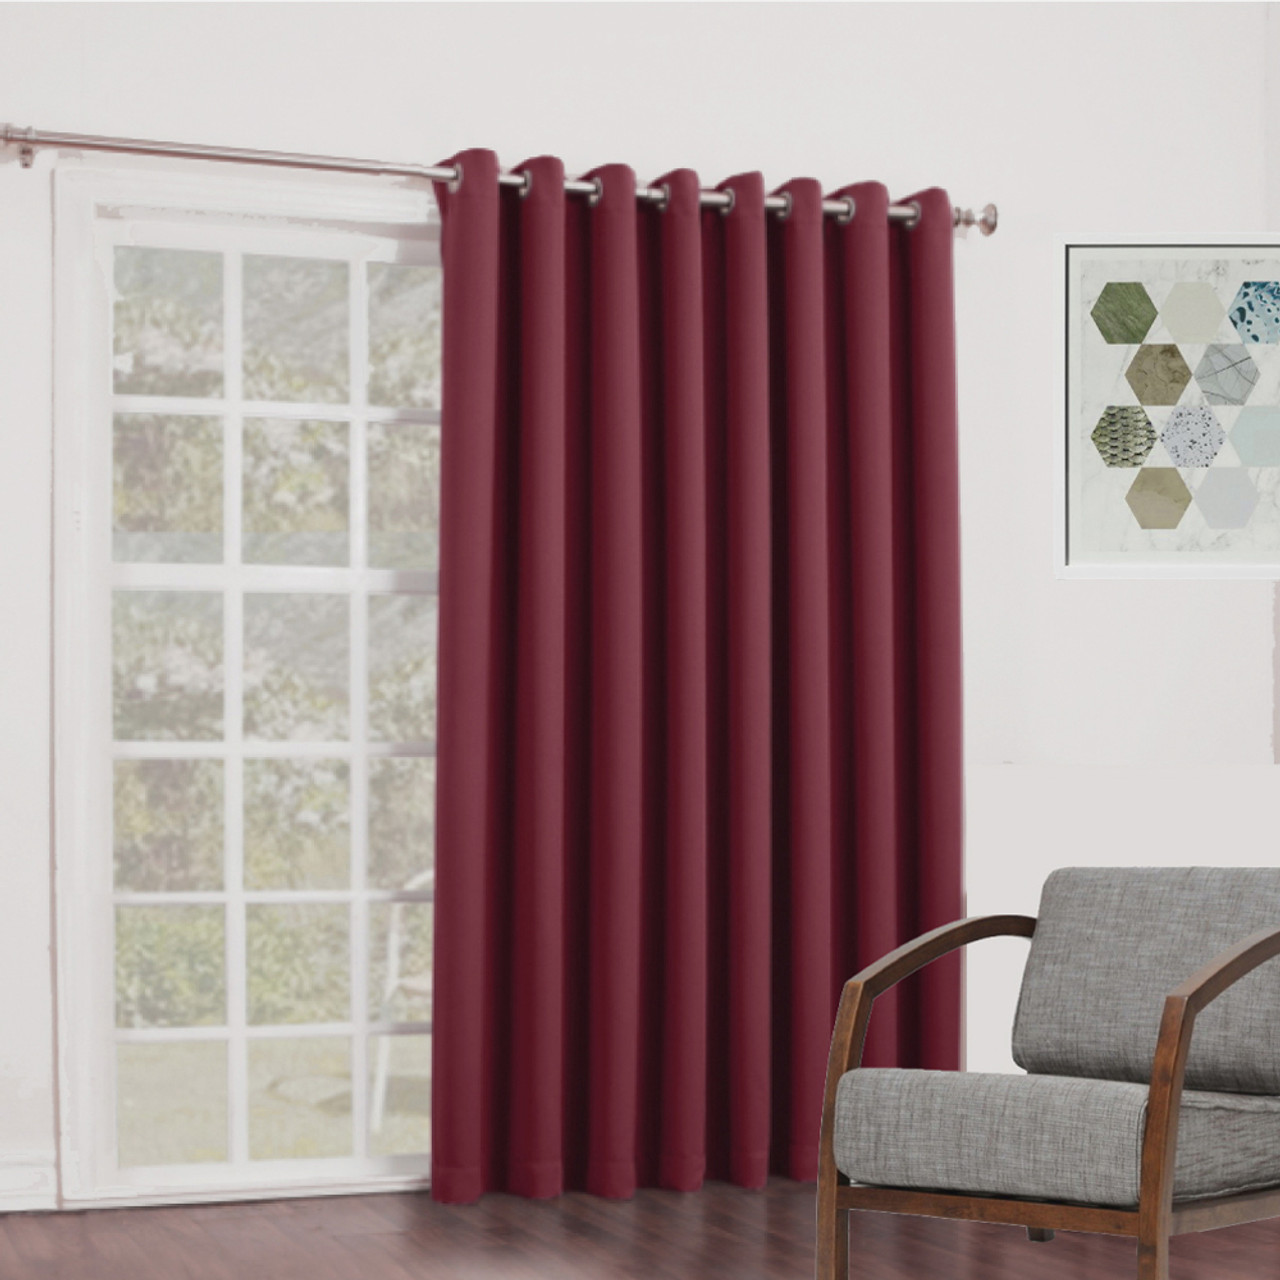 Burgundy Curtains Red Eyelet Curtains XL Drop Soft Drape Curtains By Quickfit Curtains